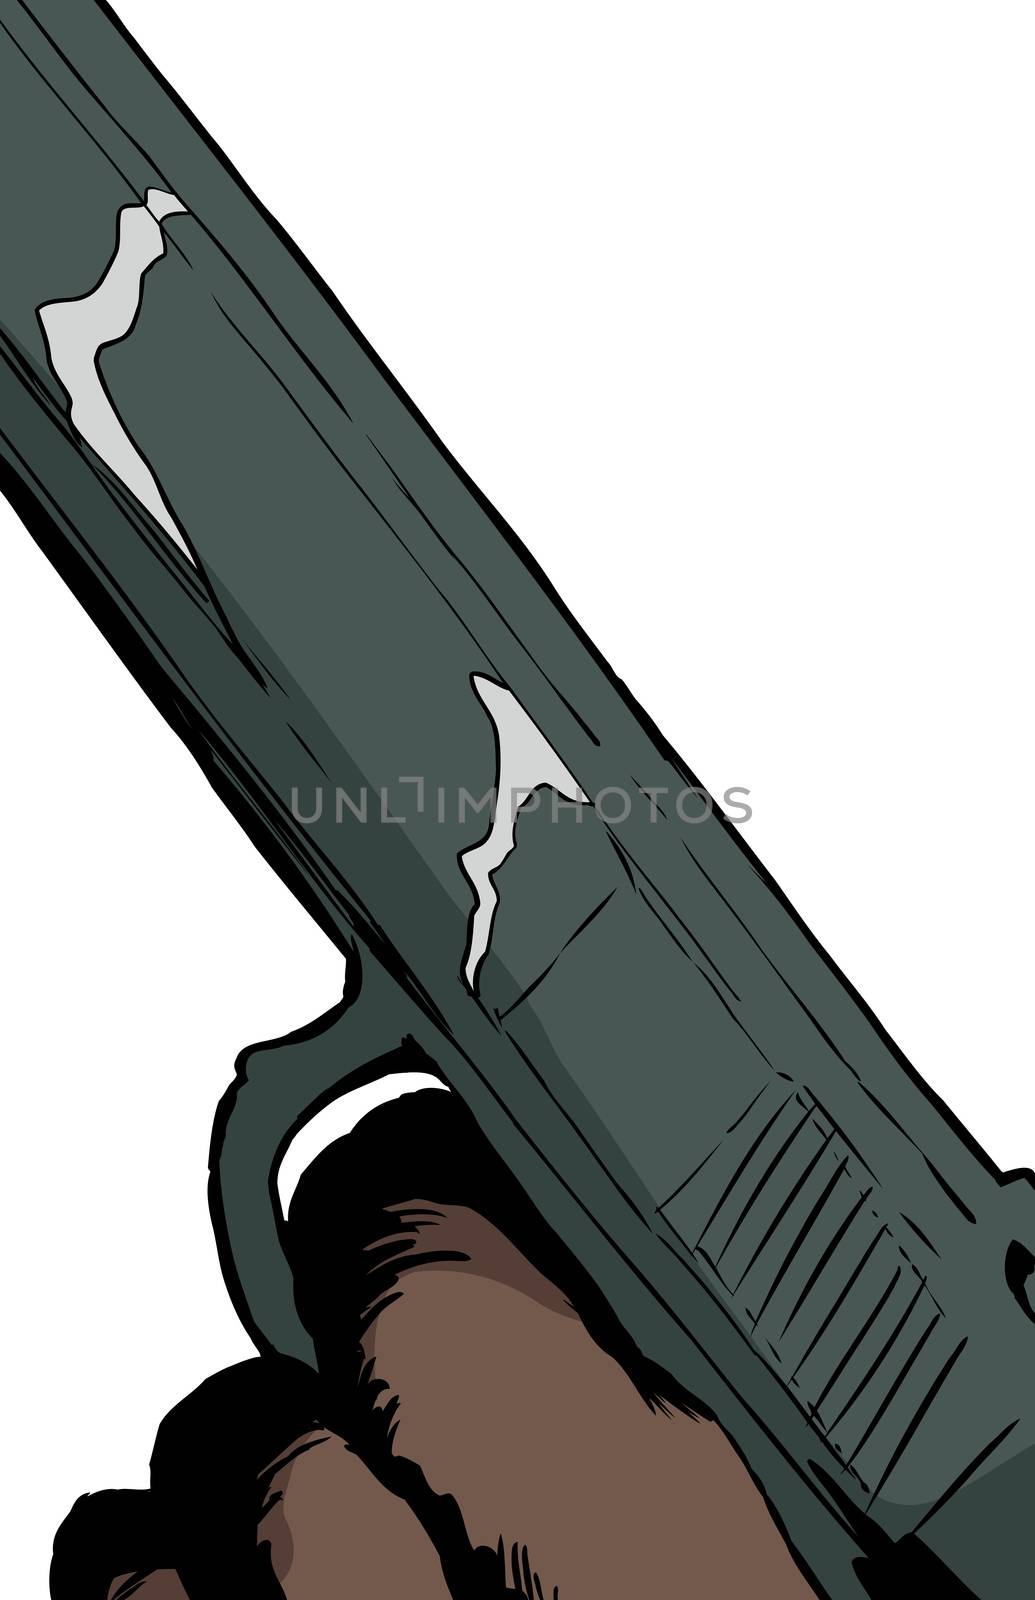 Close up on pistol with finger on trigger by TheBlackRhino